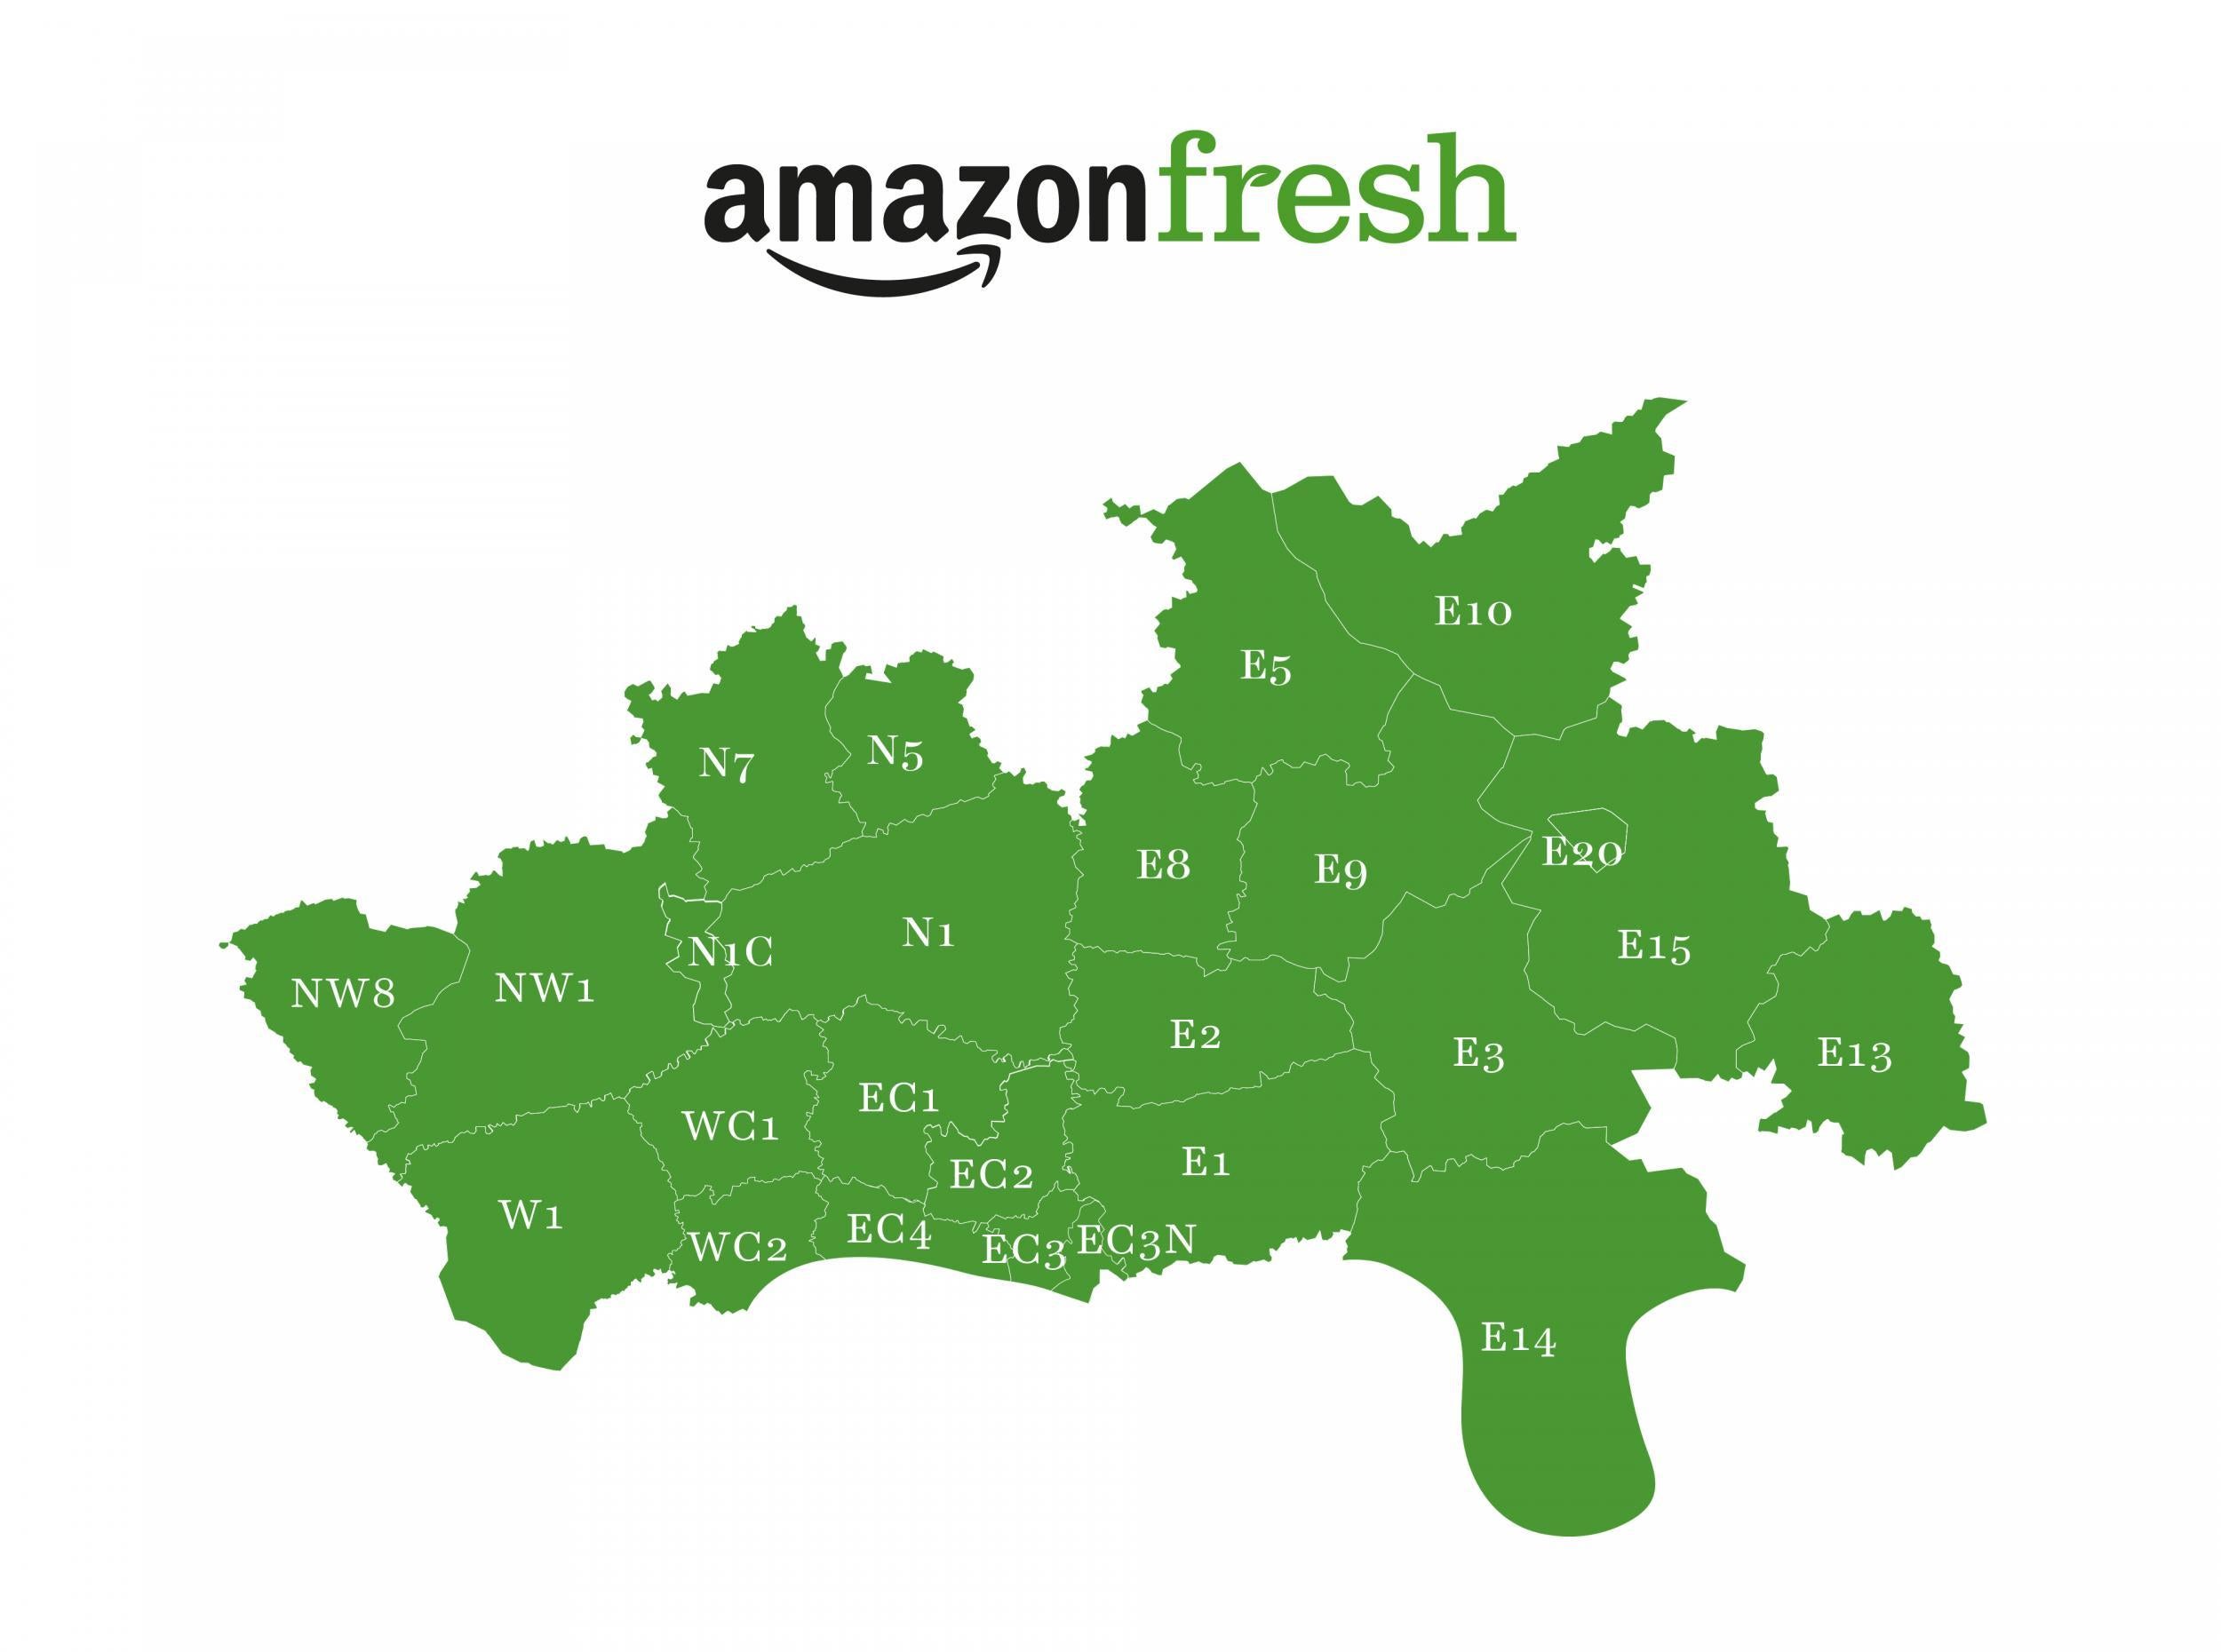 Amazon Fresh is available to Amazon Prime customers in 69 central and east London postcodes